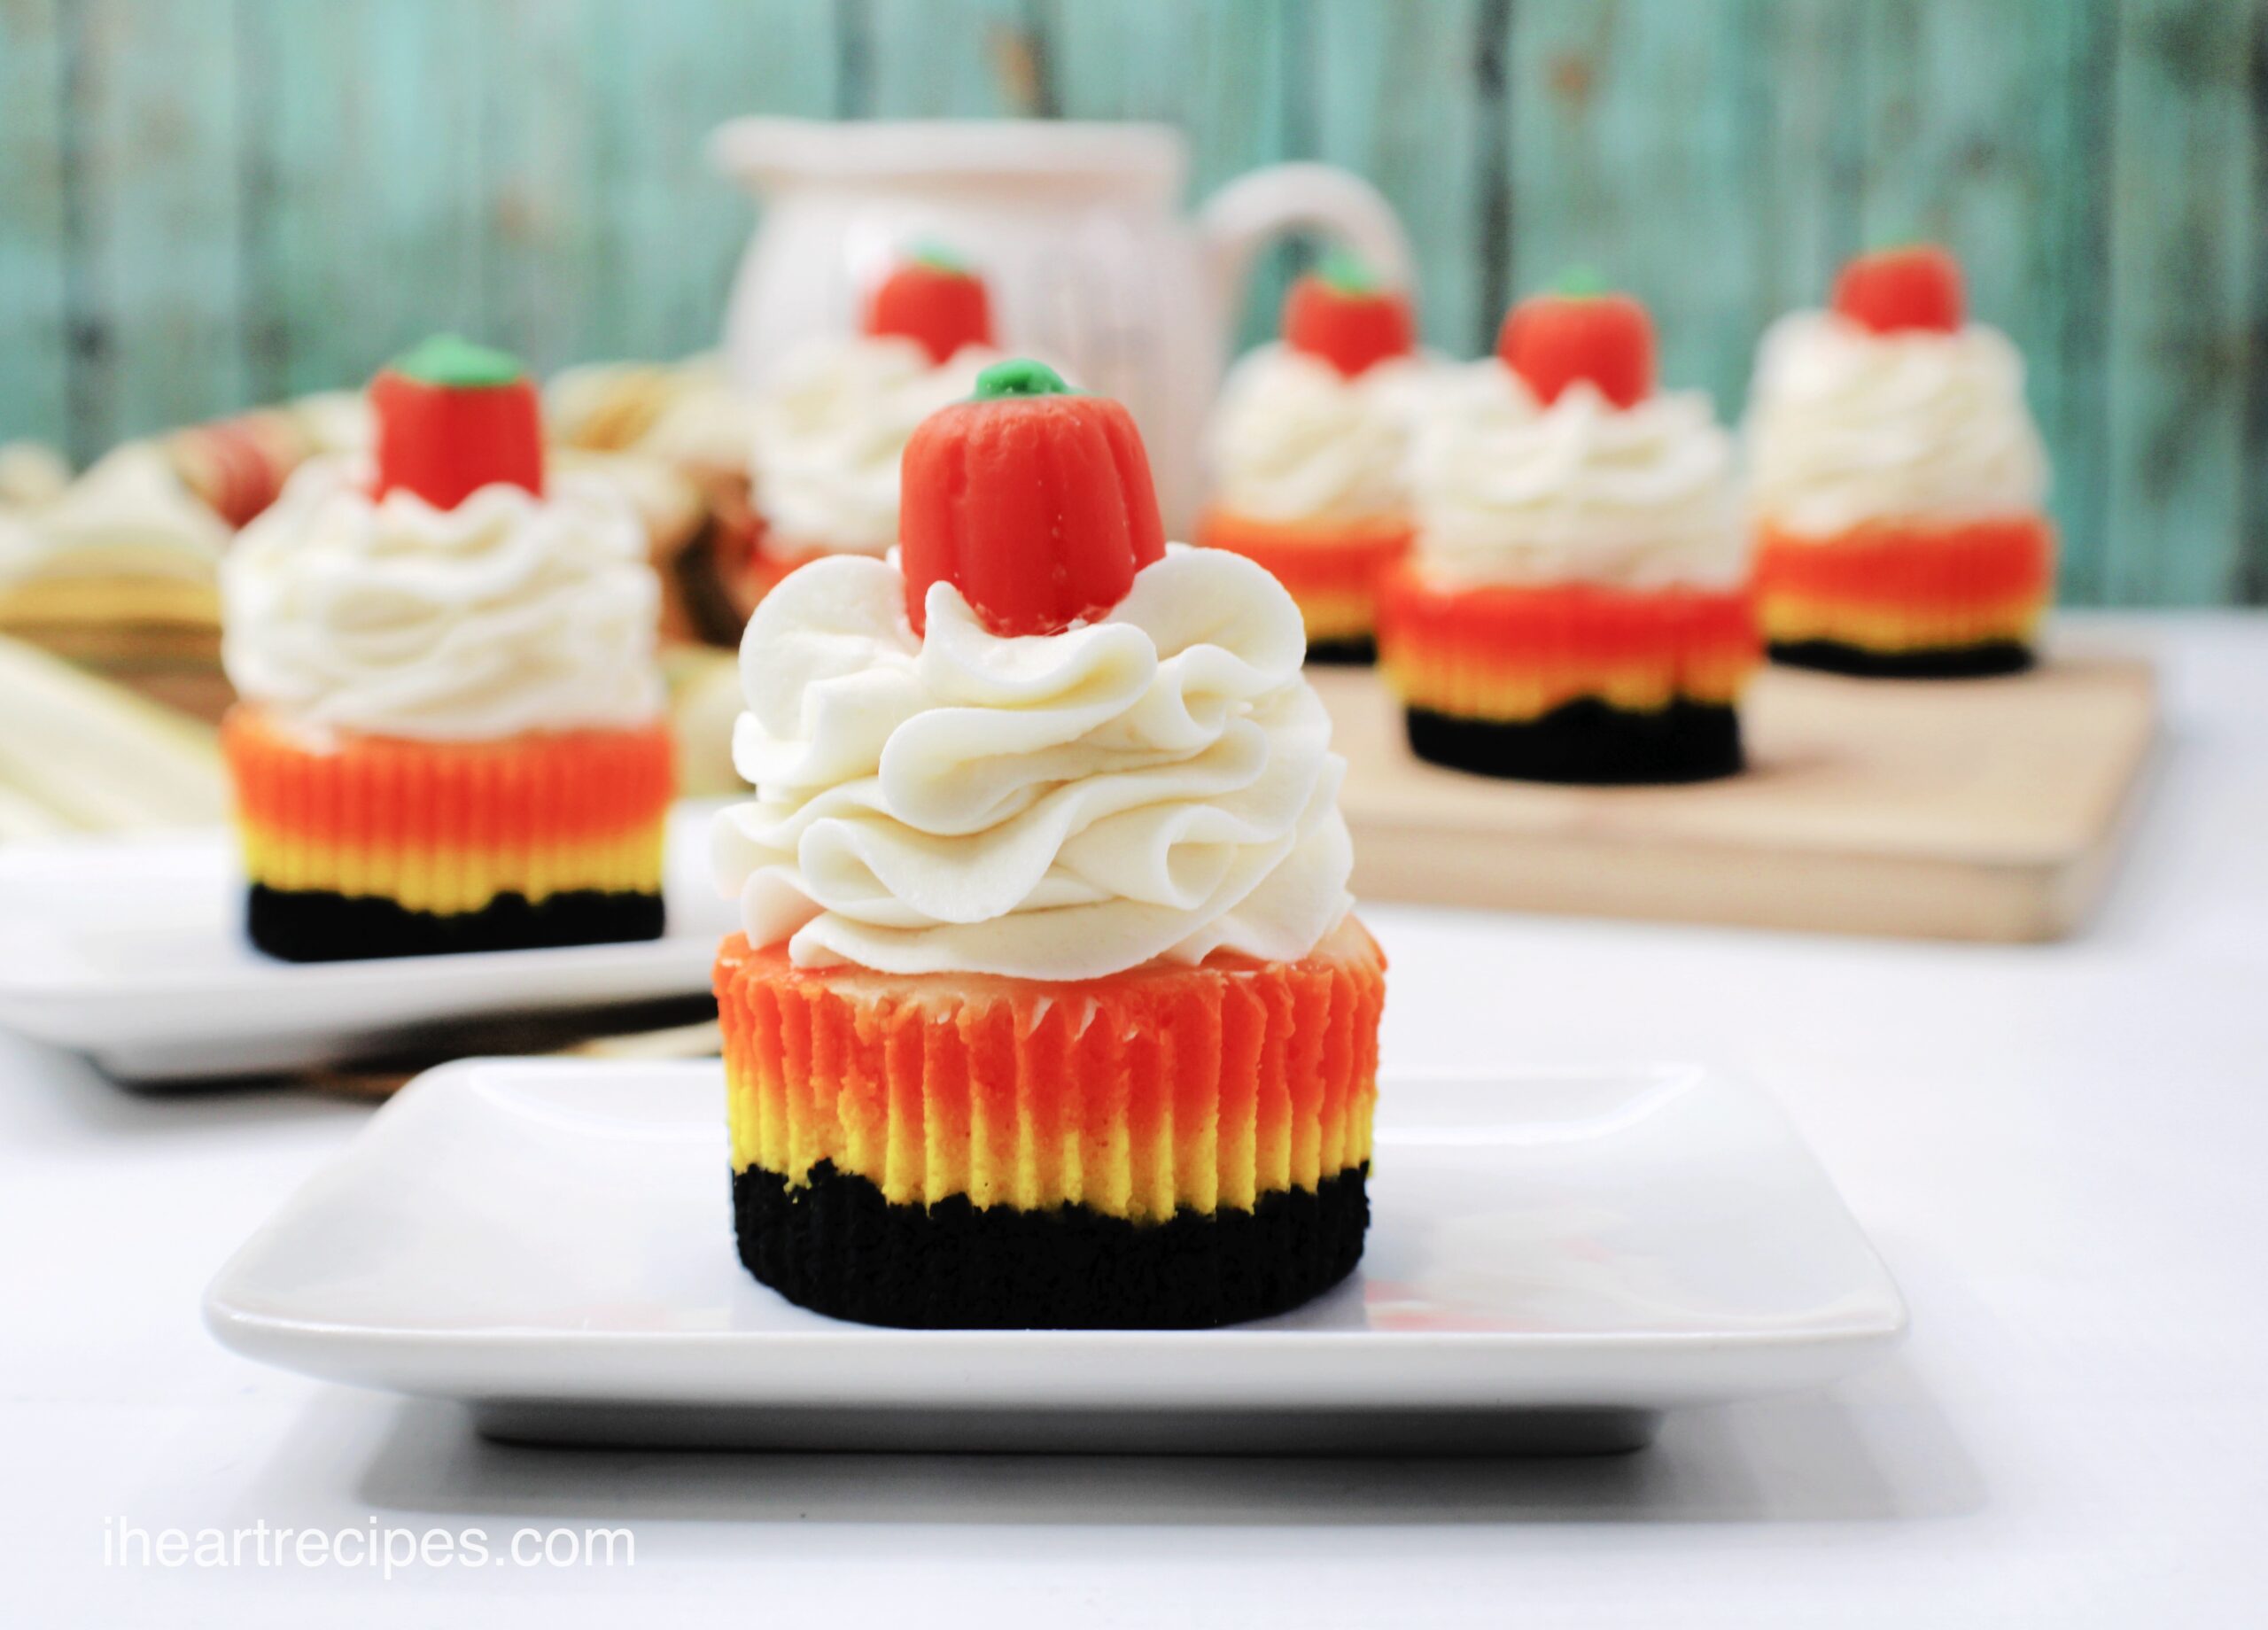 Multiple mini candy corn cheesecakes sit on small plates, each one topped with whipped cream and a candy pumpkin.